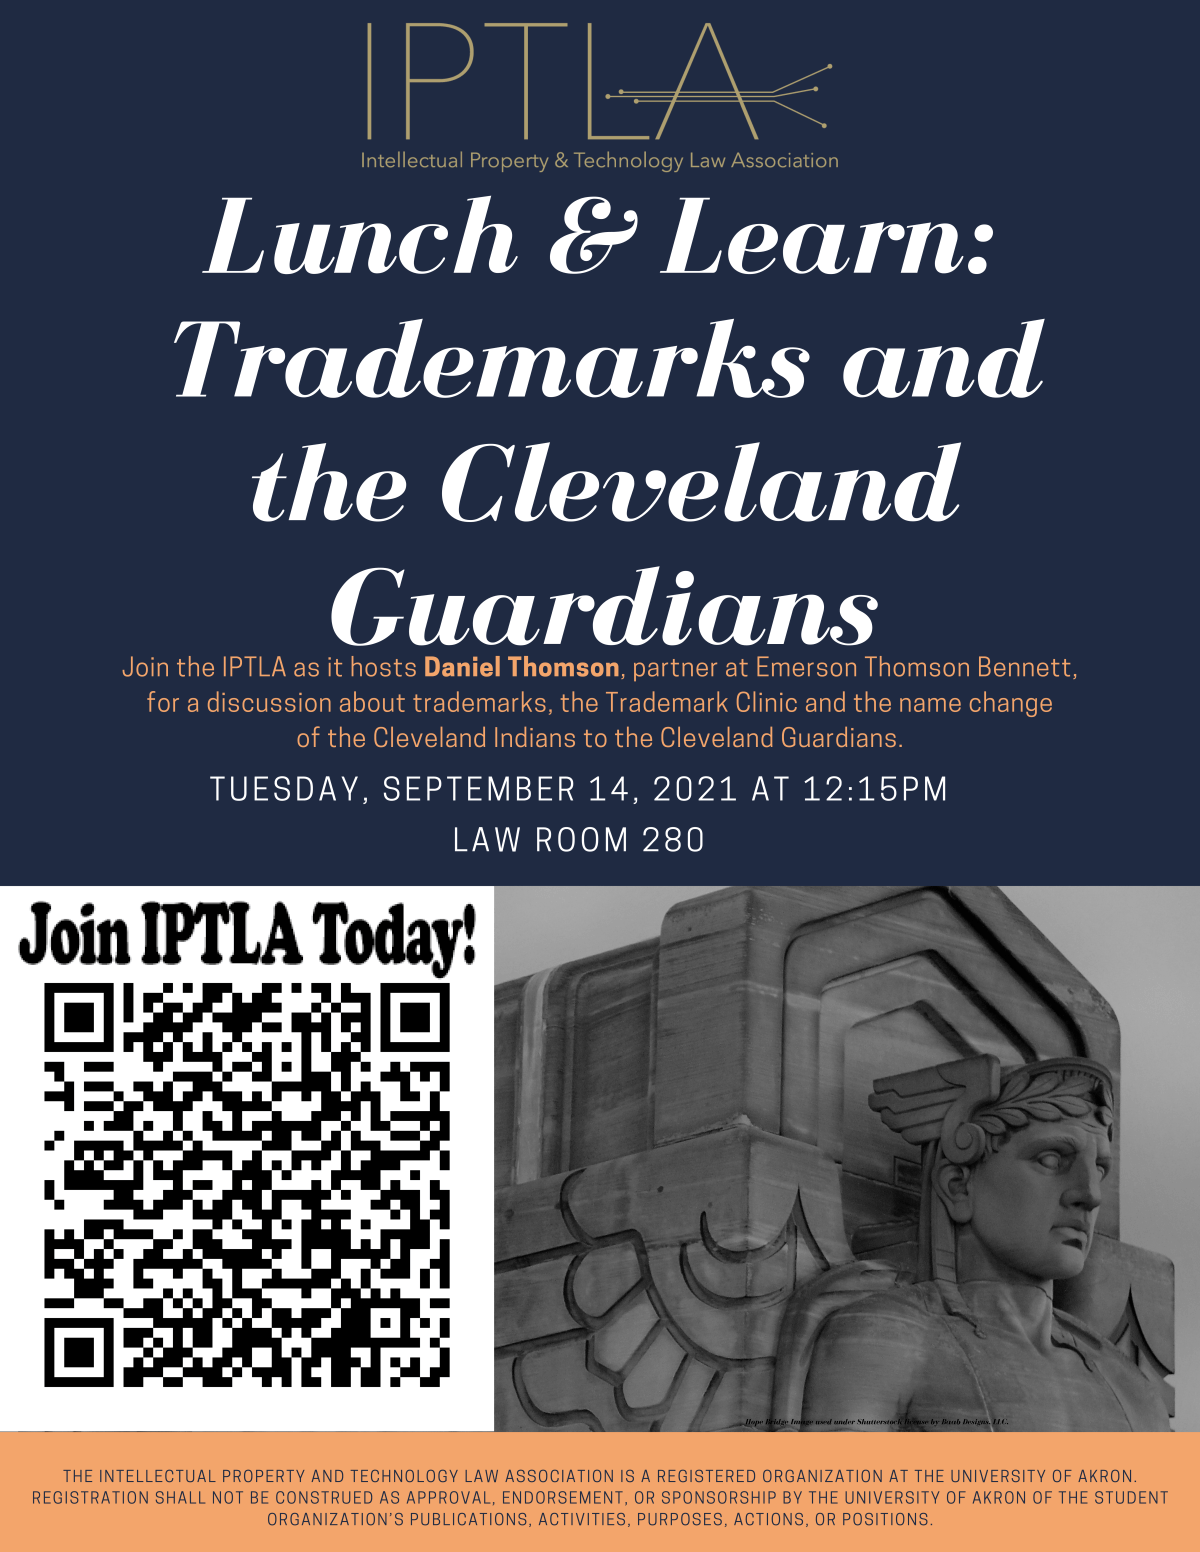 Sept. 14, 12:15PM – 1:15PM, Room 280 – IPTLA Lunch & Learn: Trademarks and the Cleveland Guardians. Join us in person or virtually at: https://bit.ly/3h81uqz